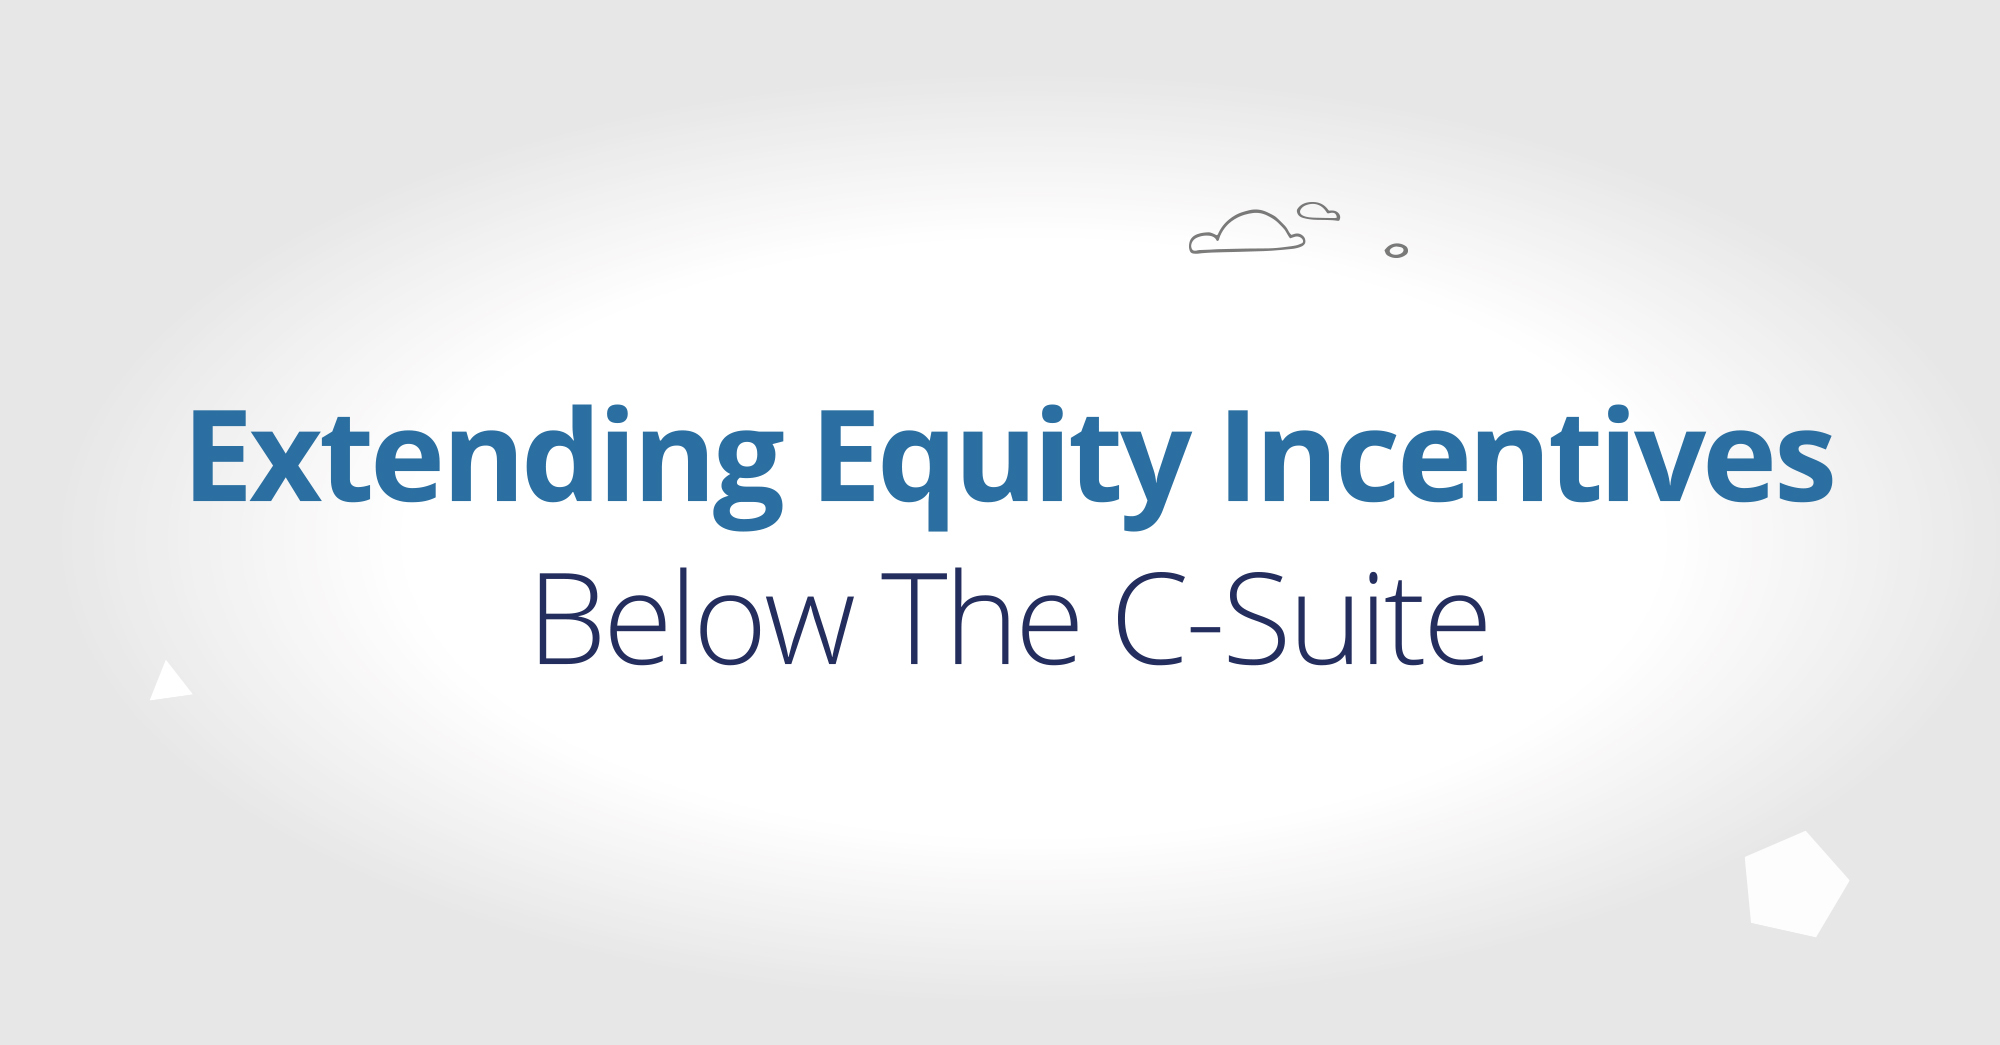 Extending Equity Incentives Below The C-Suite